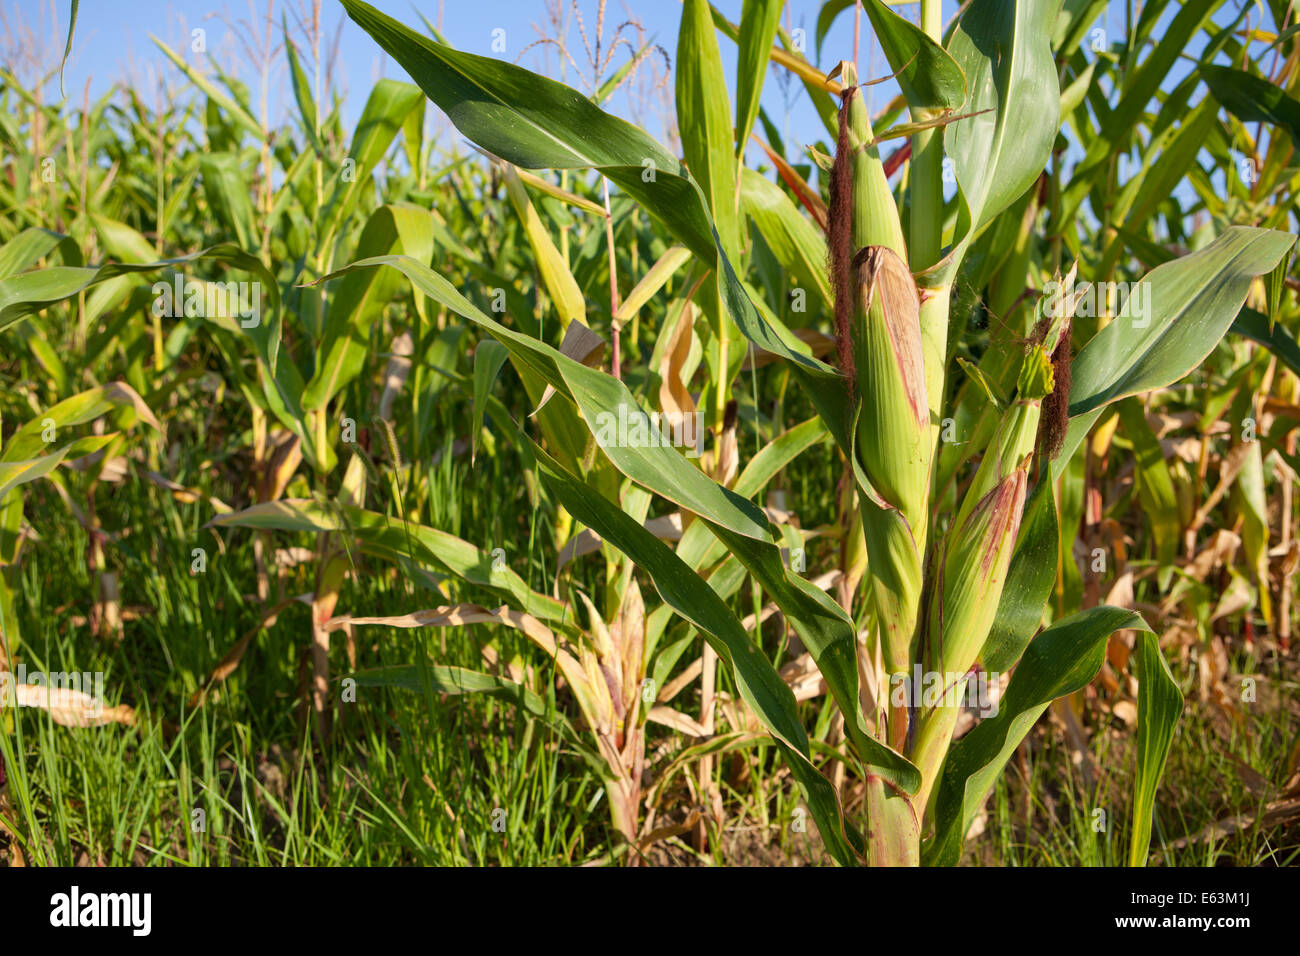 Green field of young corn under the sunlight, Guadiana River wetlands, Badajoz, Spain Stock Photo